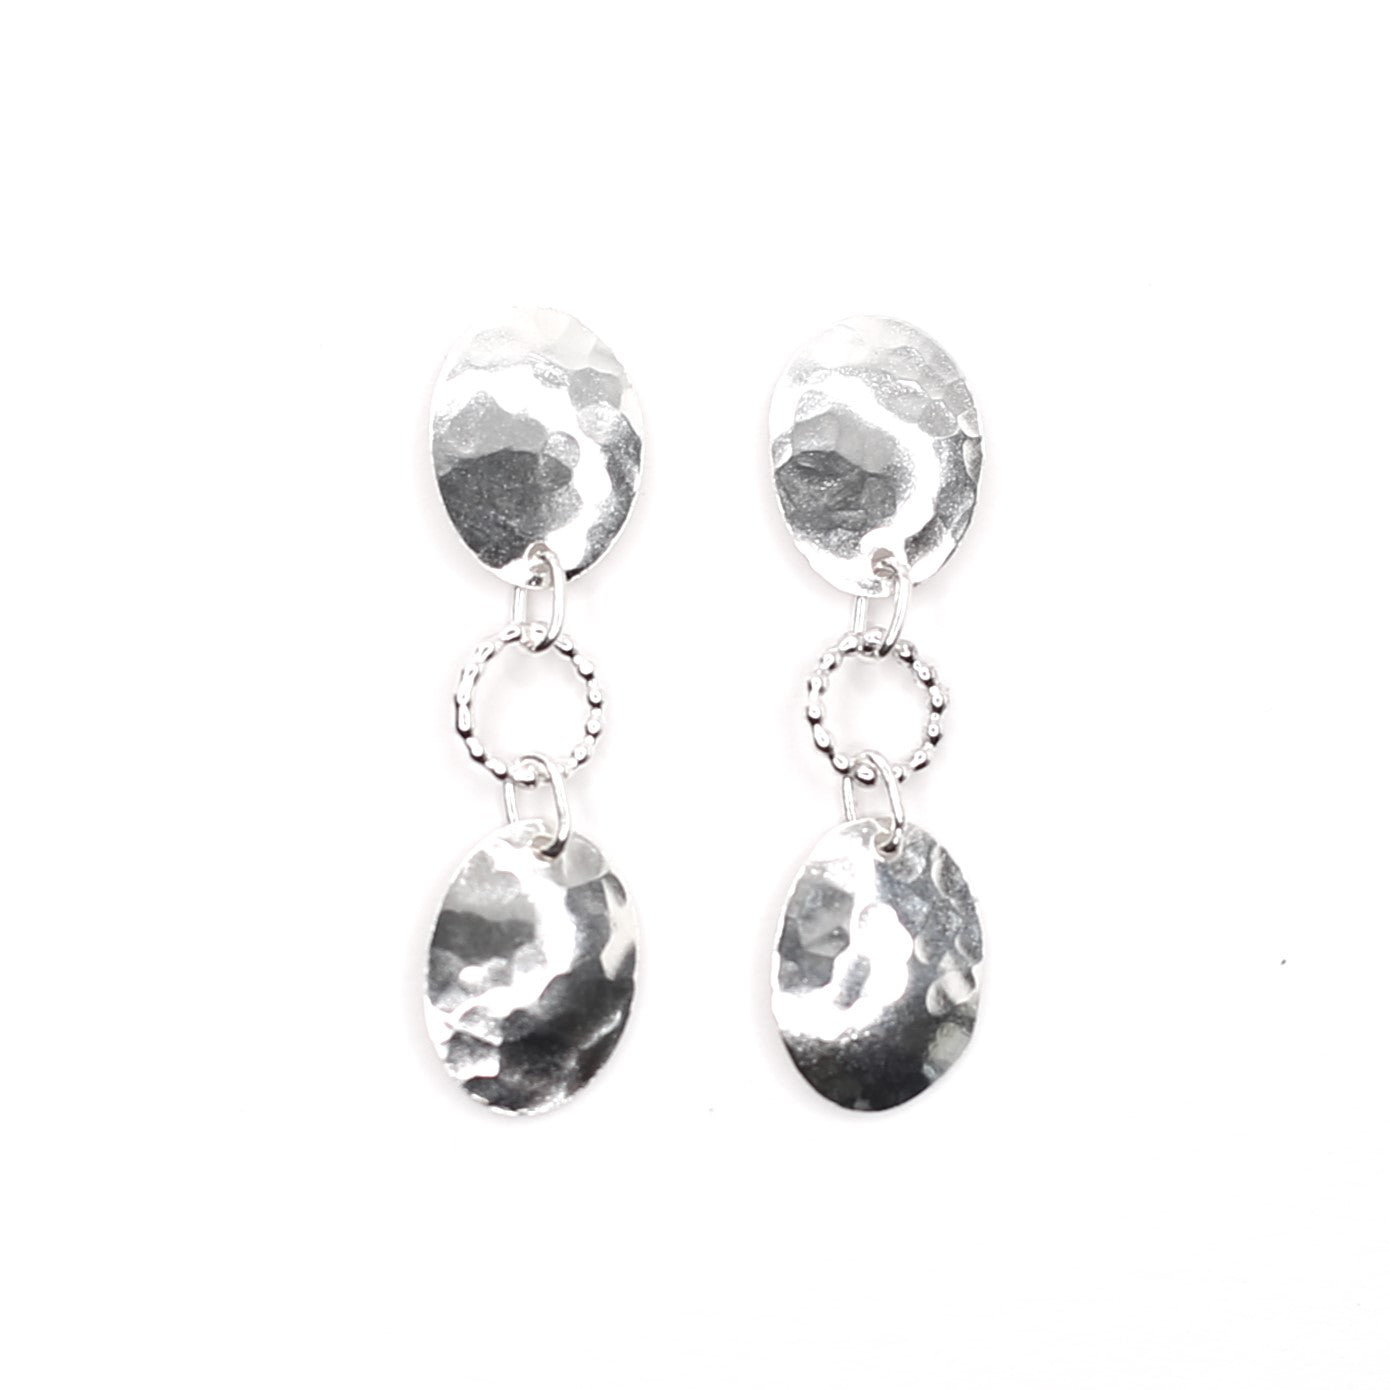 Hammered Shield and Beaded Circle Sterling Silver Dangle Everyday Post Earrings. Handmade by Cara Carter Jewelry